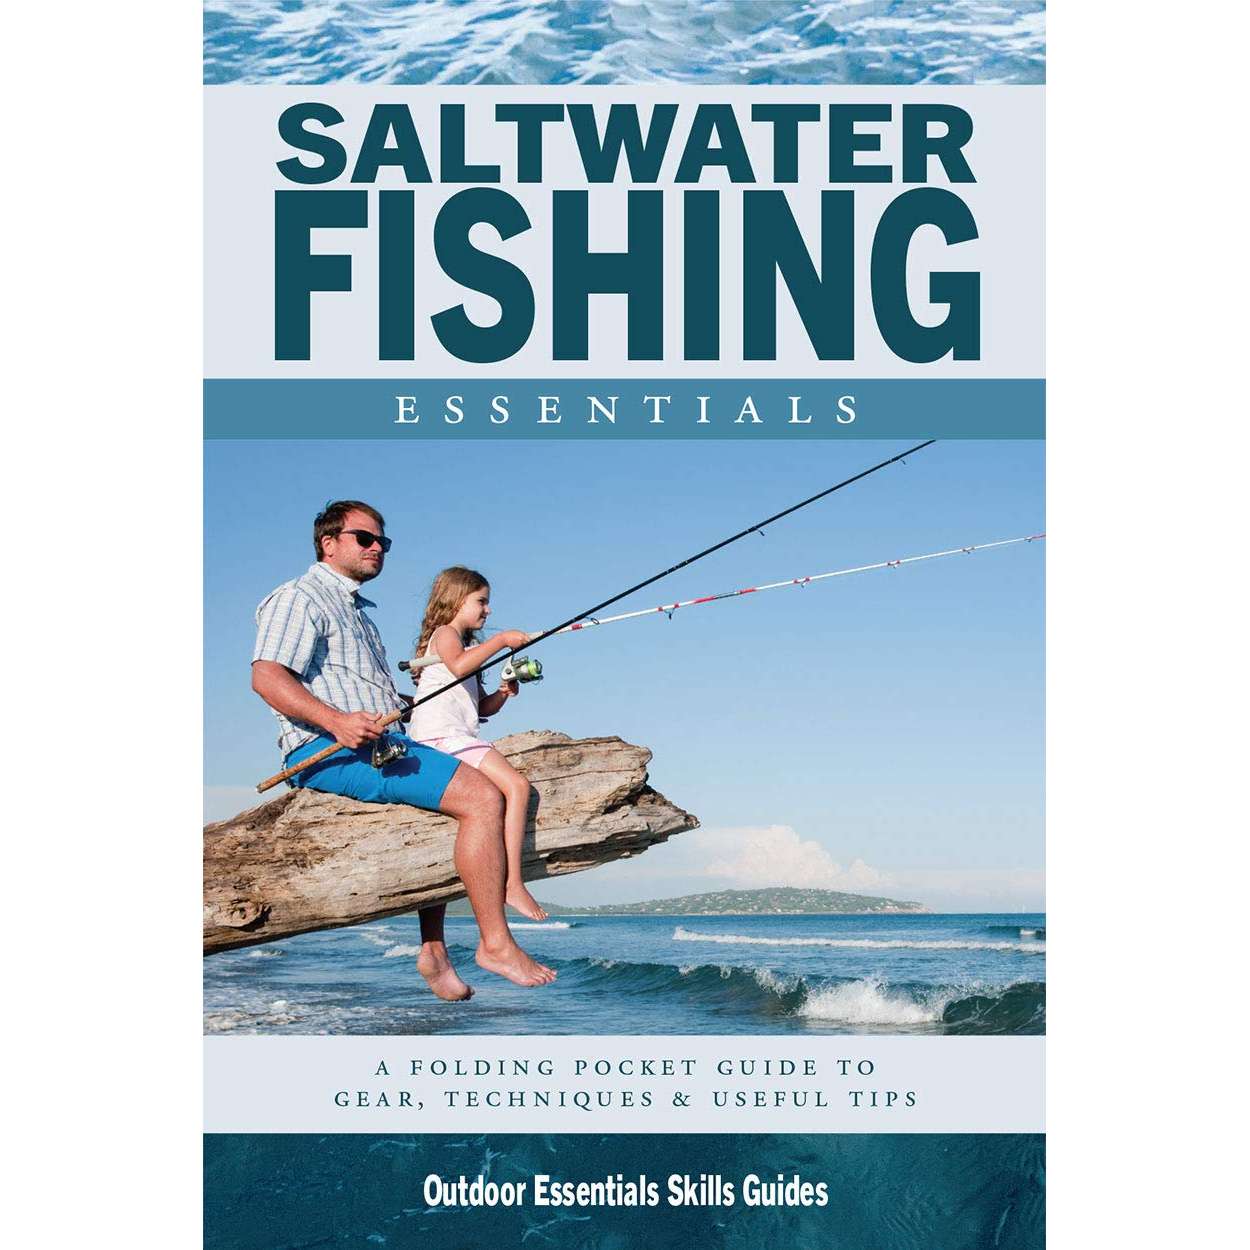 Outdoors, Camping & Travel :: All Outdoors Books :: Fishing :: Saltwater  Fishing Essentials: A Folding Pocket Guide to Gear, Techniques & Useful  Tips - Paradise Cay - Wholesale Books, Gifts, Navigational Charts, On  Demand Publishing